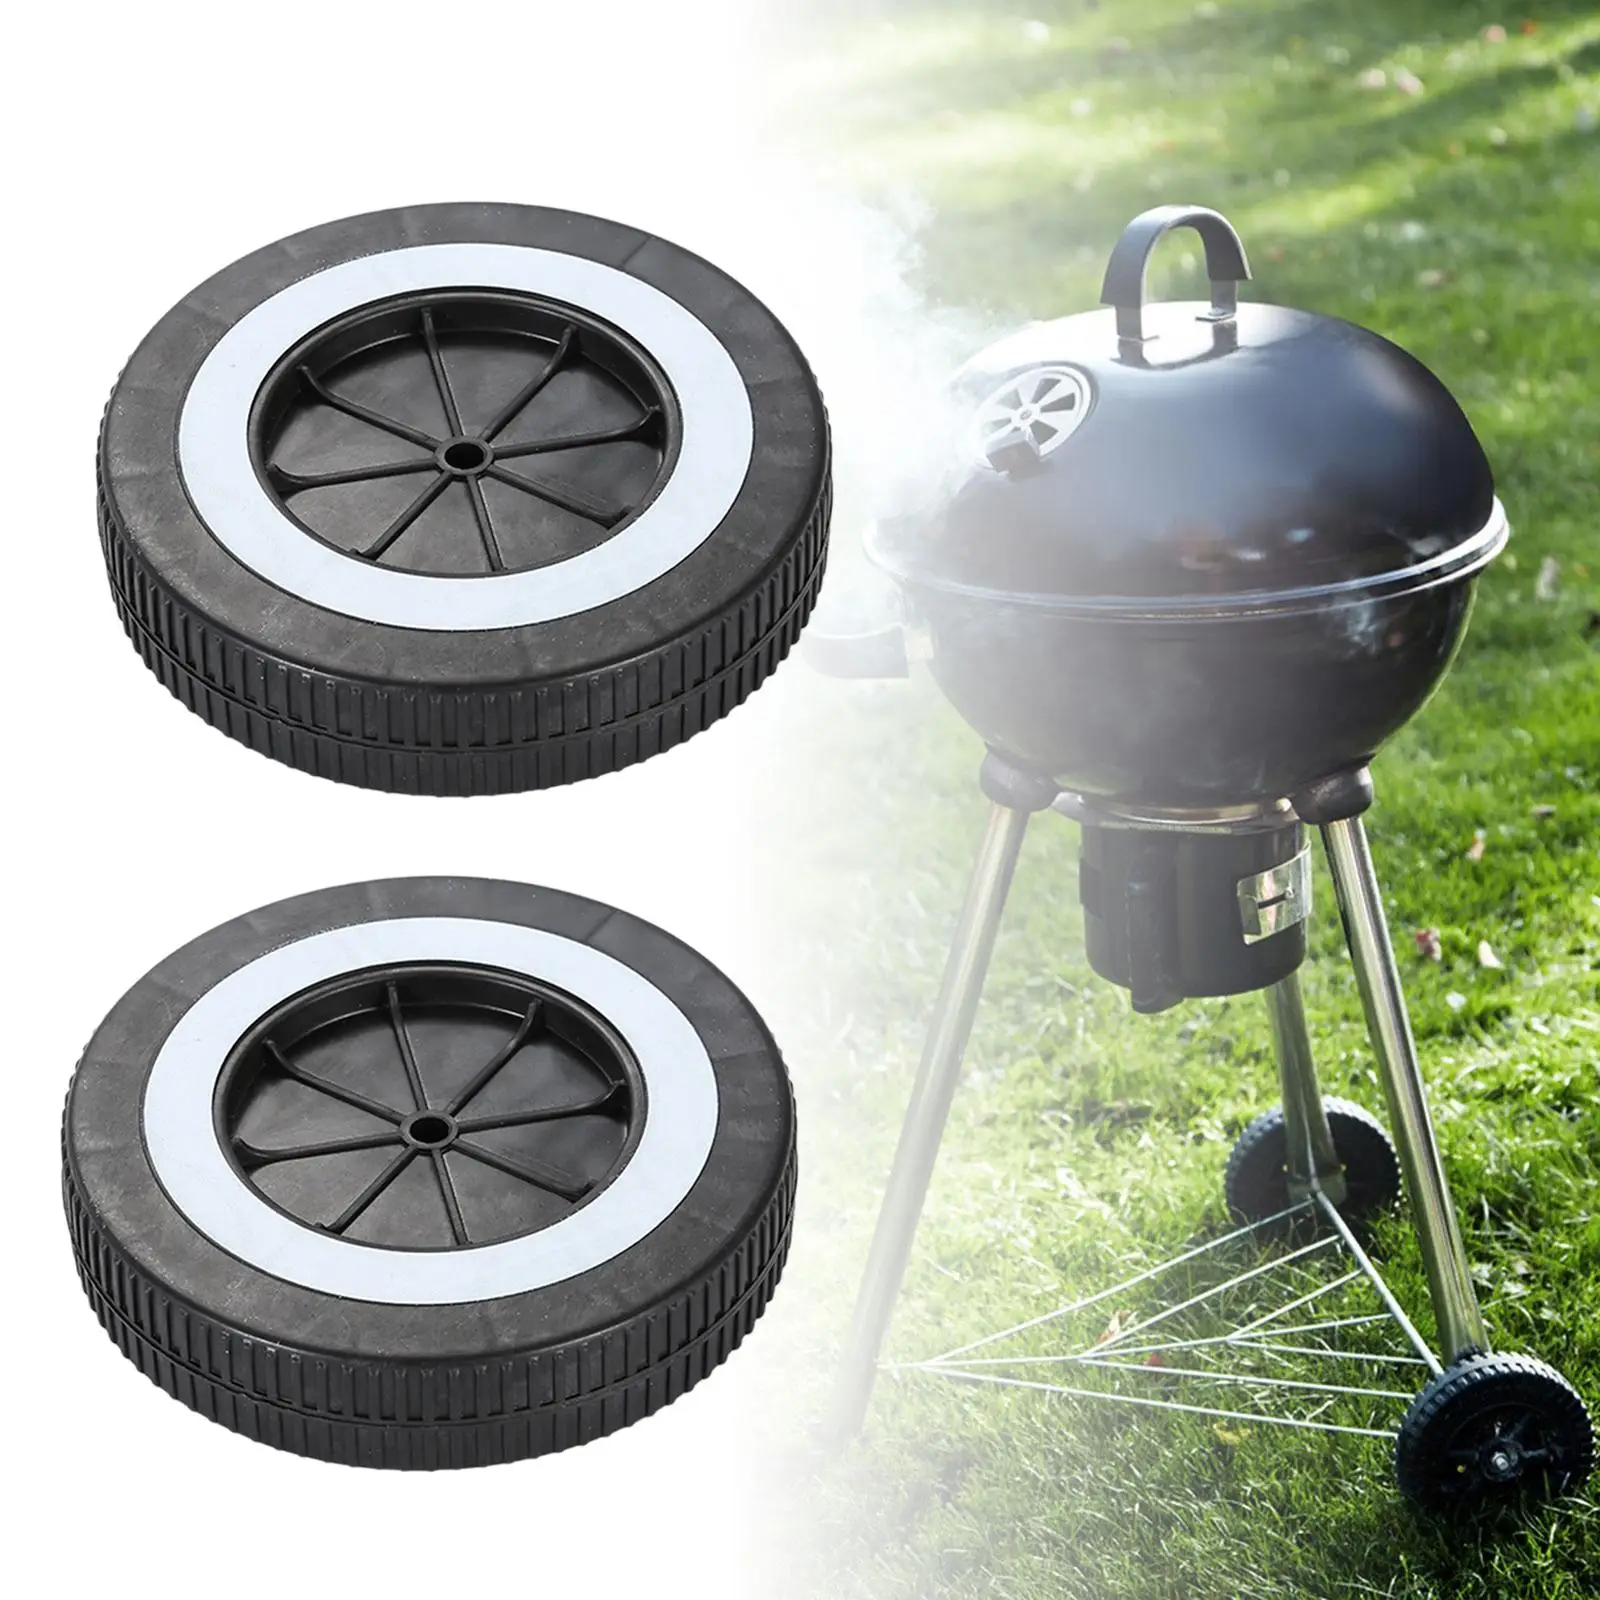 2x BBQ Wheels Easy to Install Gas Grills Wheels for Barbecue Patio Garden